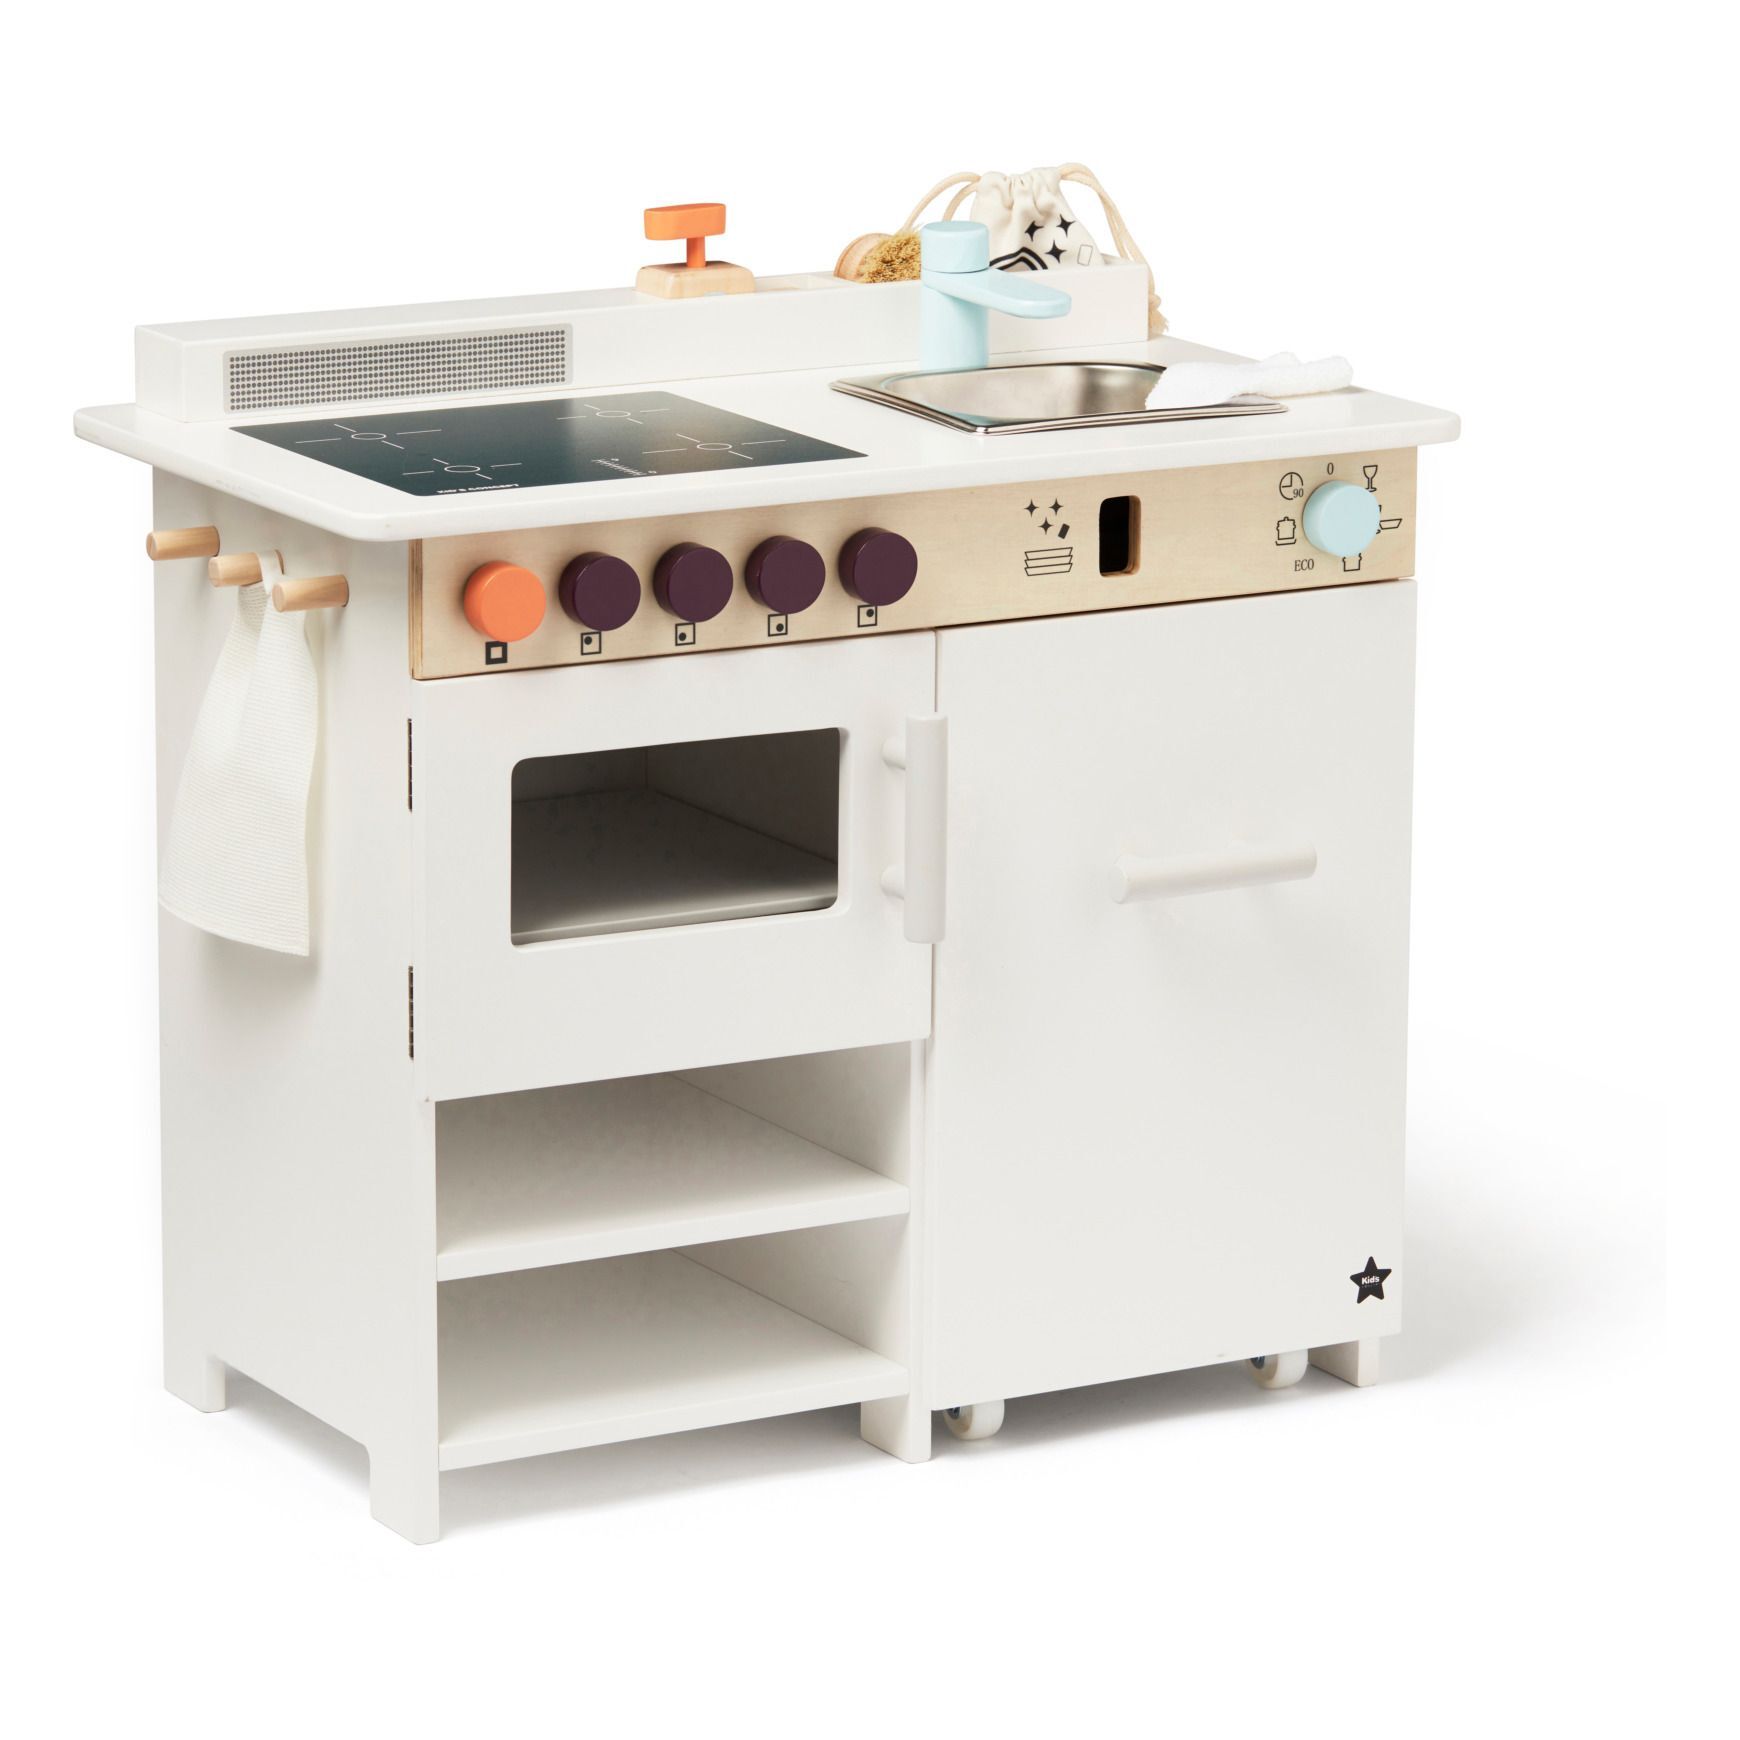 Kid's Concept Toy Kitchen with Dishwasher Multicoloured one size unisex